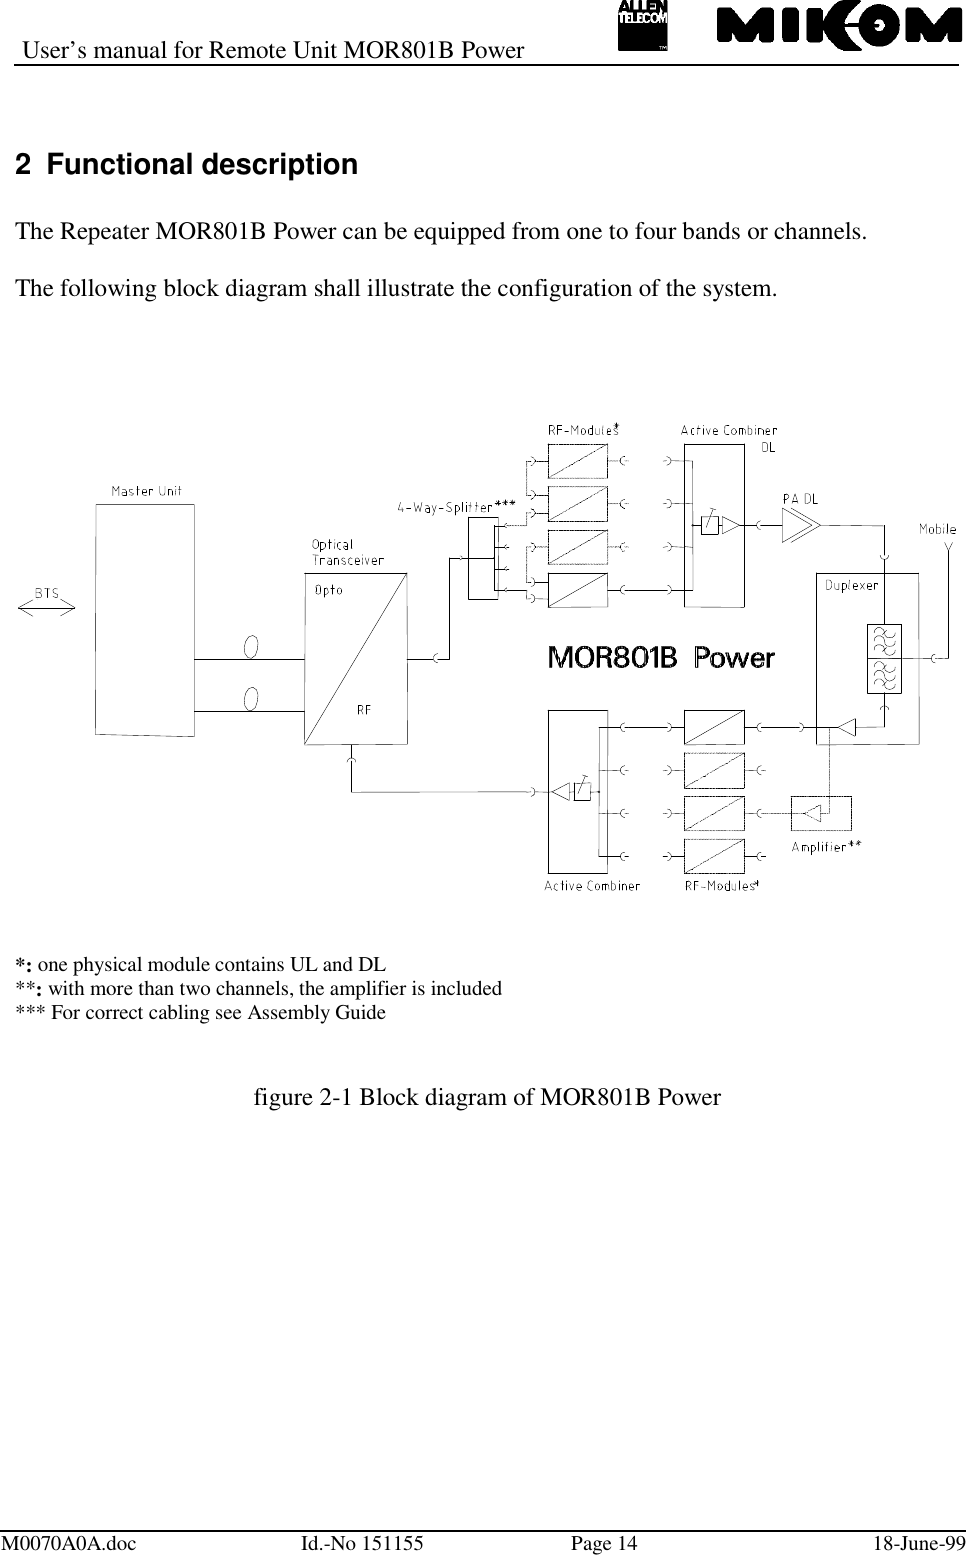 User’s manual for Remote Unit MOR801B PowerM0070A0A.doc Id.-No 151155 Page 14 18-June-992 Functional descriptionThe Repeater MOR801B Power can be equipped from one to four bands or channels.The following block diagram shall illustrate the configuration of the system.*: one physical module contains UL and DL**: with more than two channels, the amplifier is included*** For correct cabling see Assembly Guidefigure 2-1 Block diagram of MOR801B Power